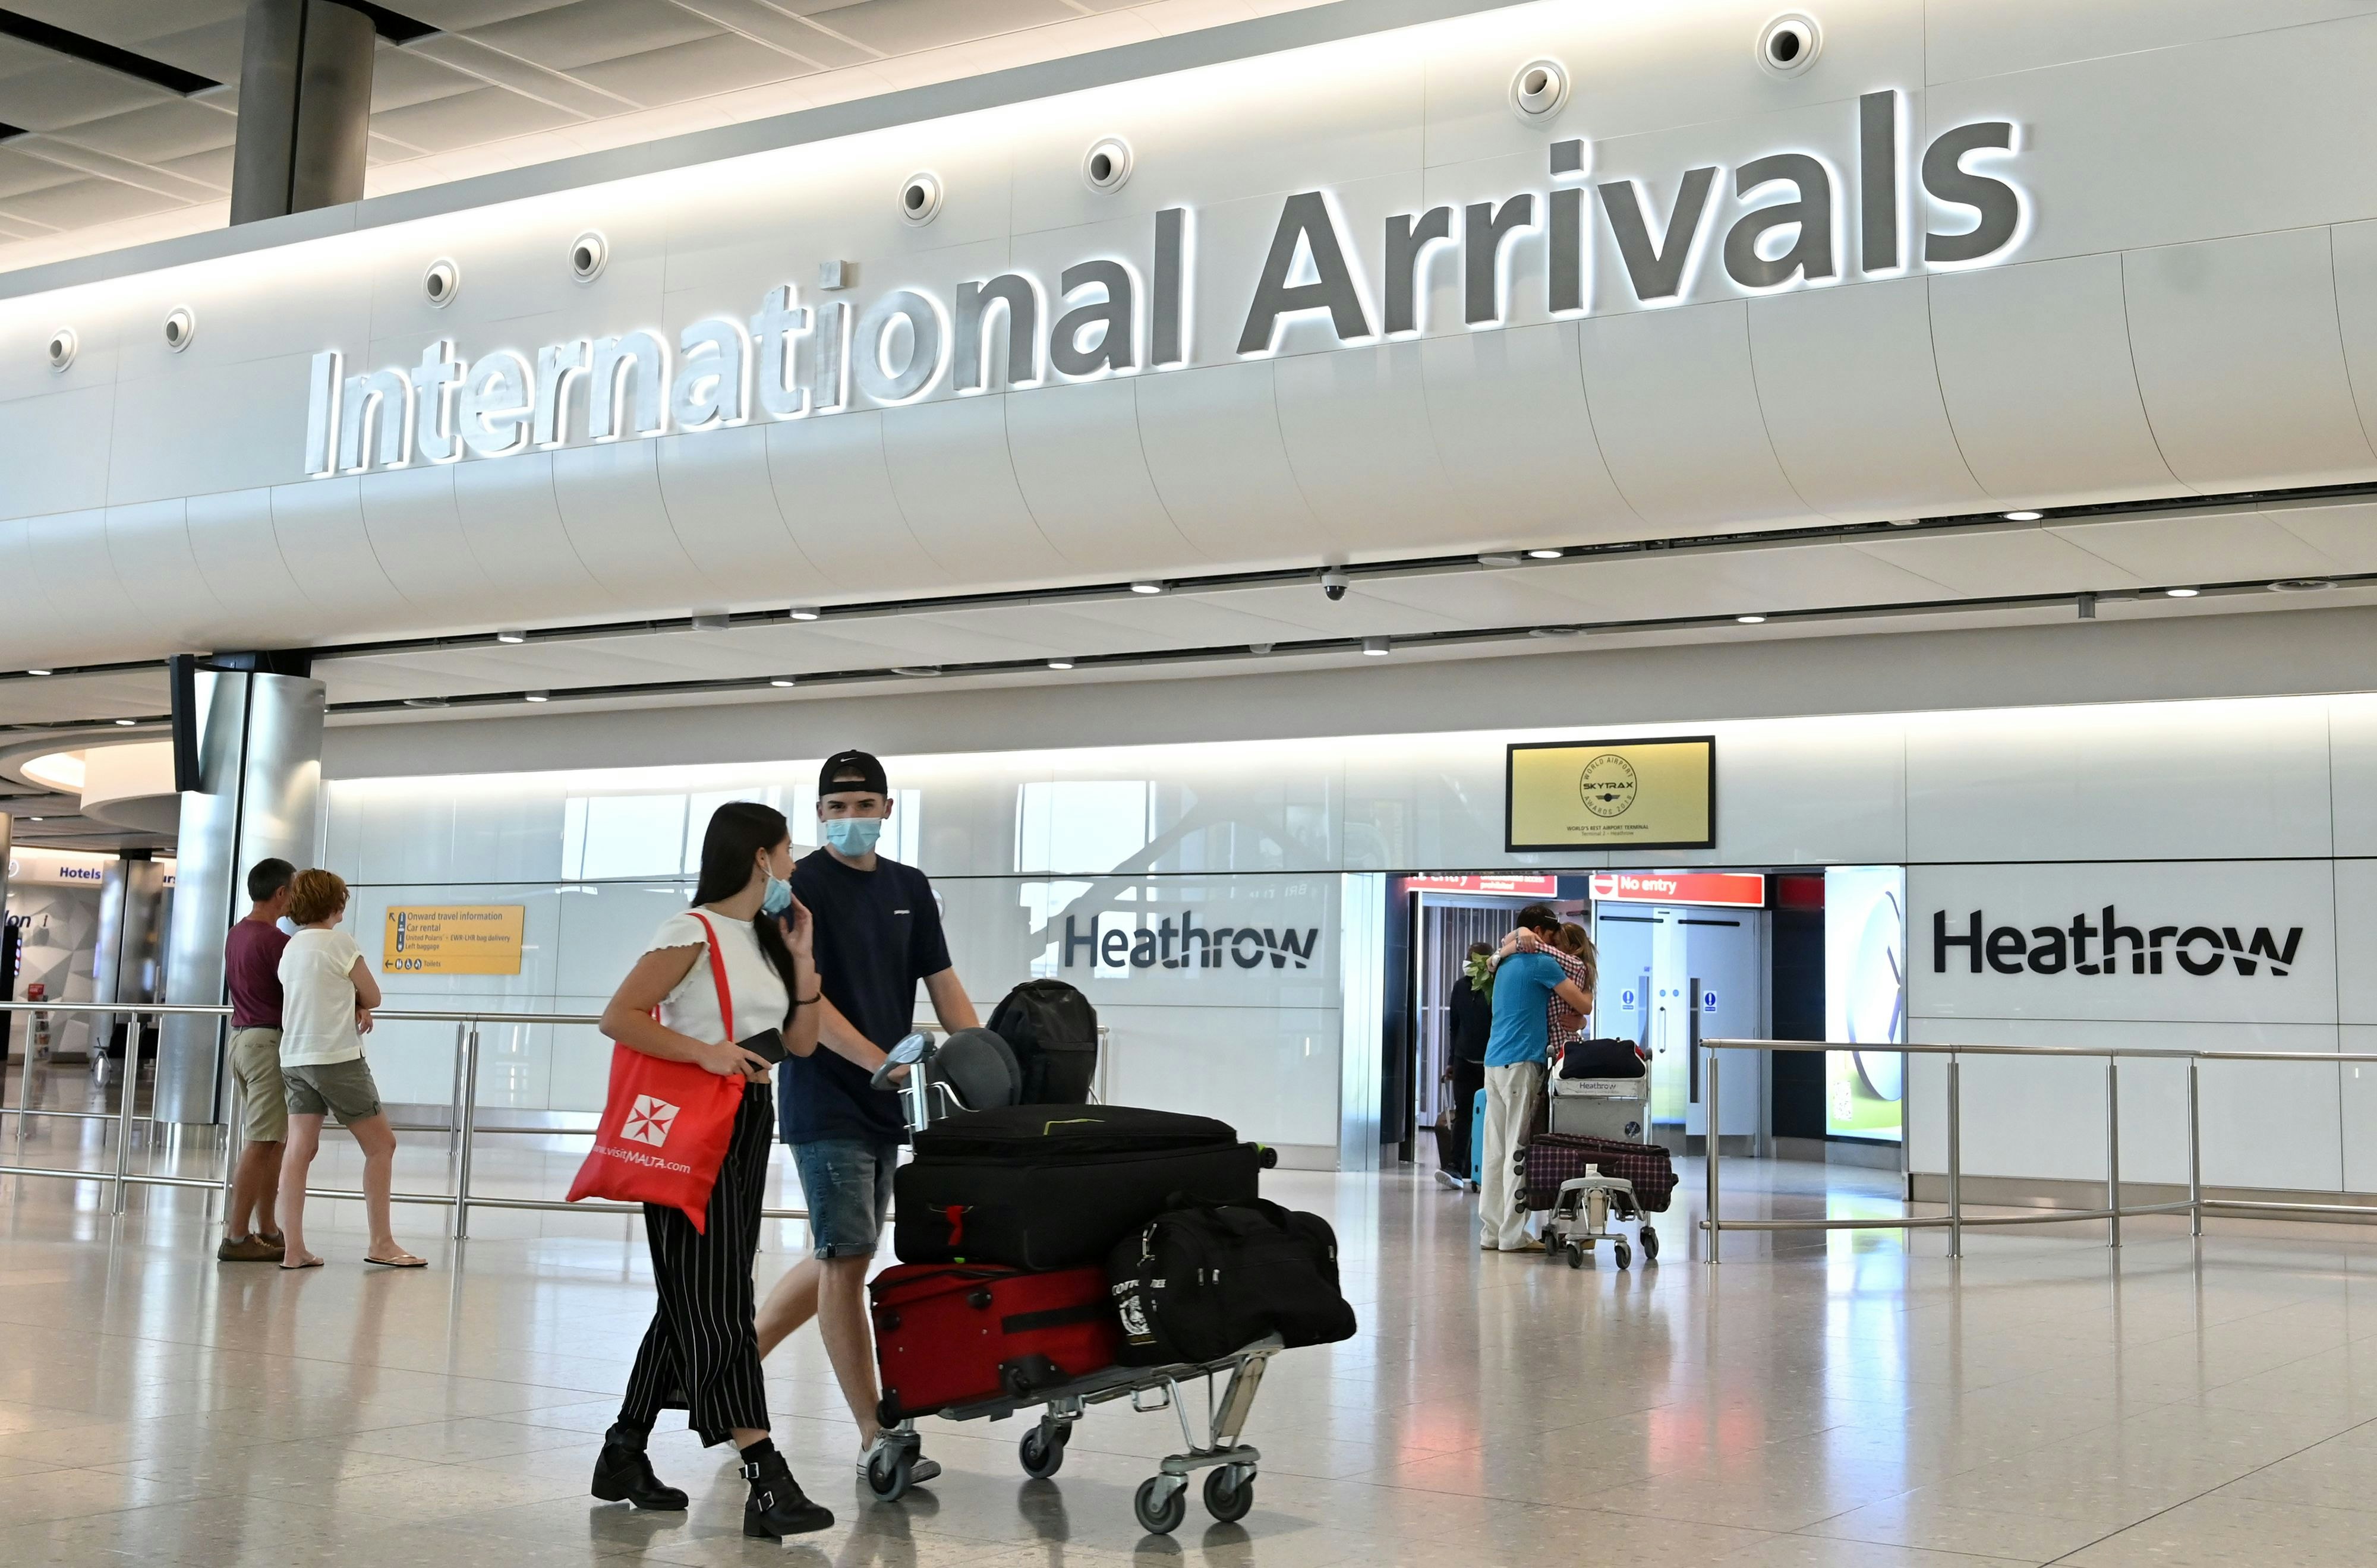 A couple wearing face masks push their luggage on a trolley in front of the International Arrivals sign at London Heathrow Airport